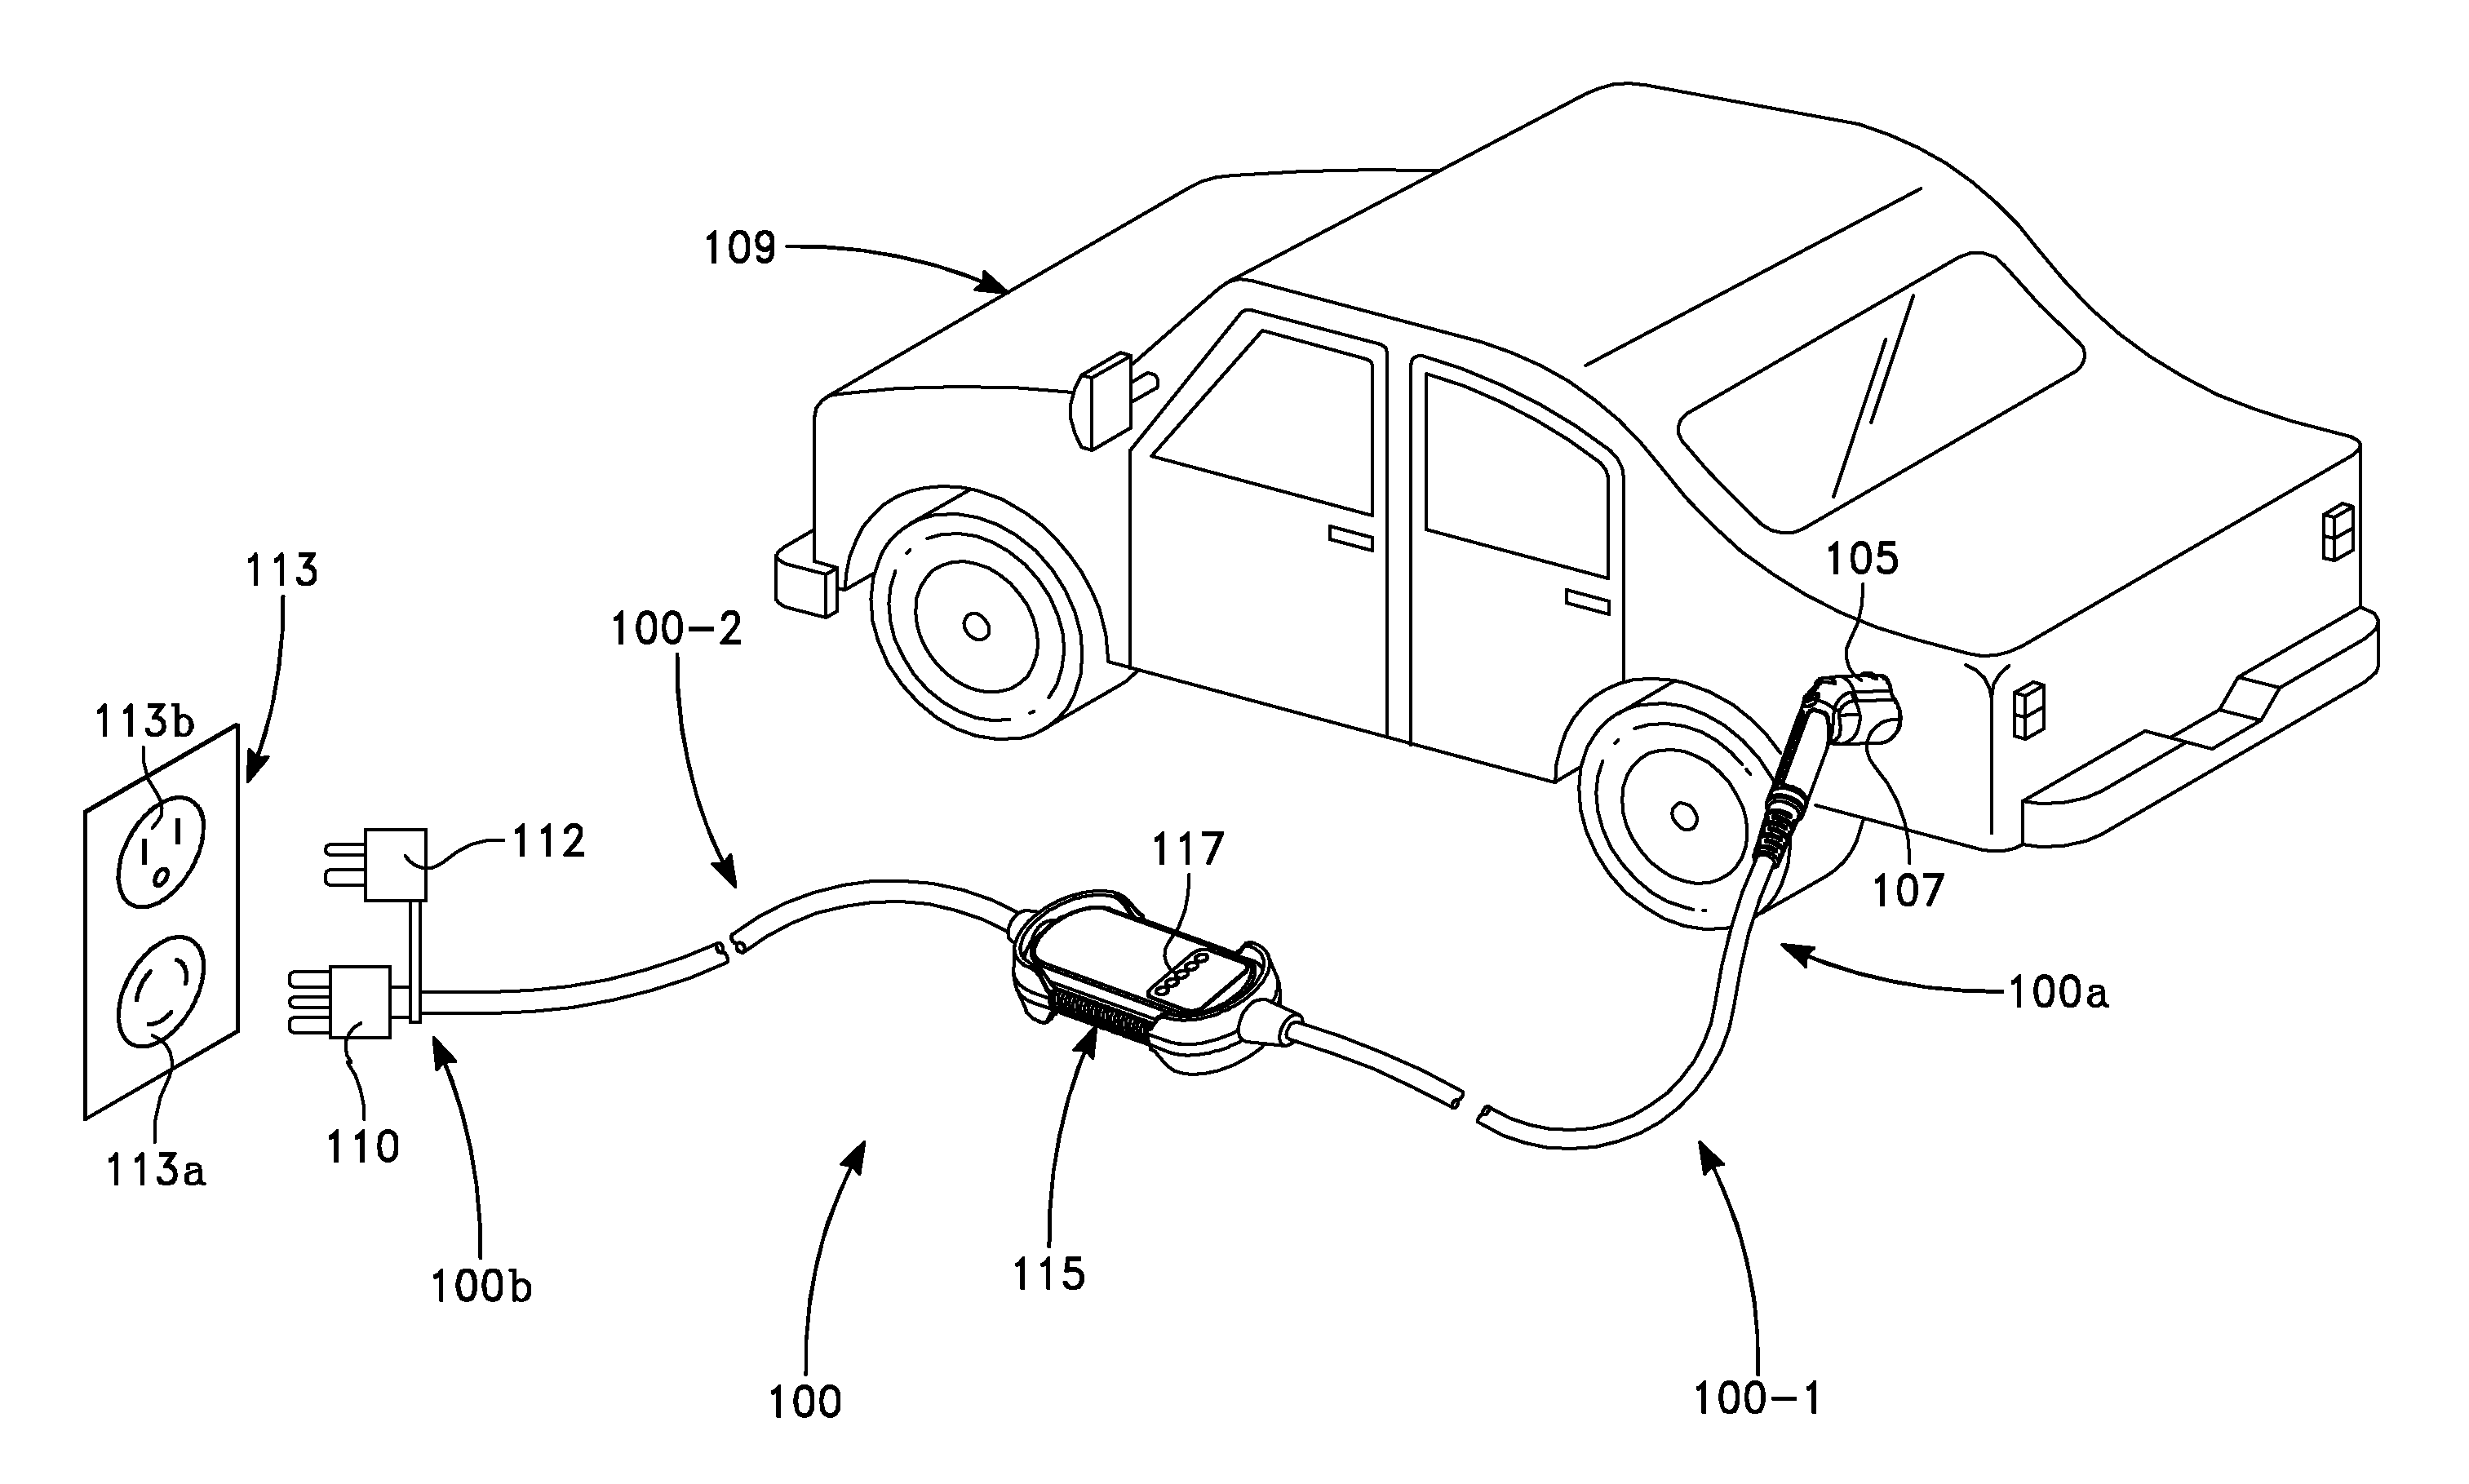 Electric vehicle supply equipment with temperature controlled current